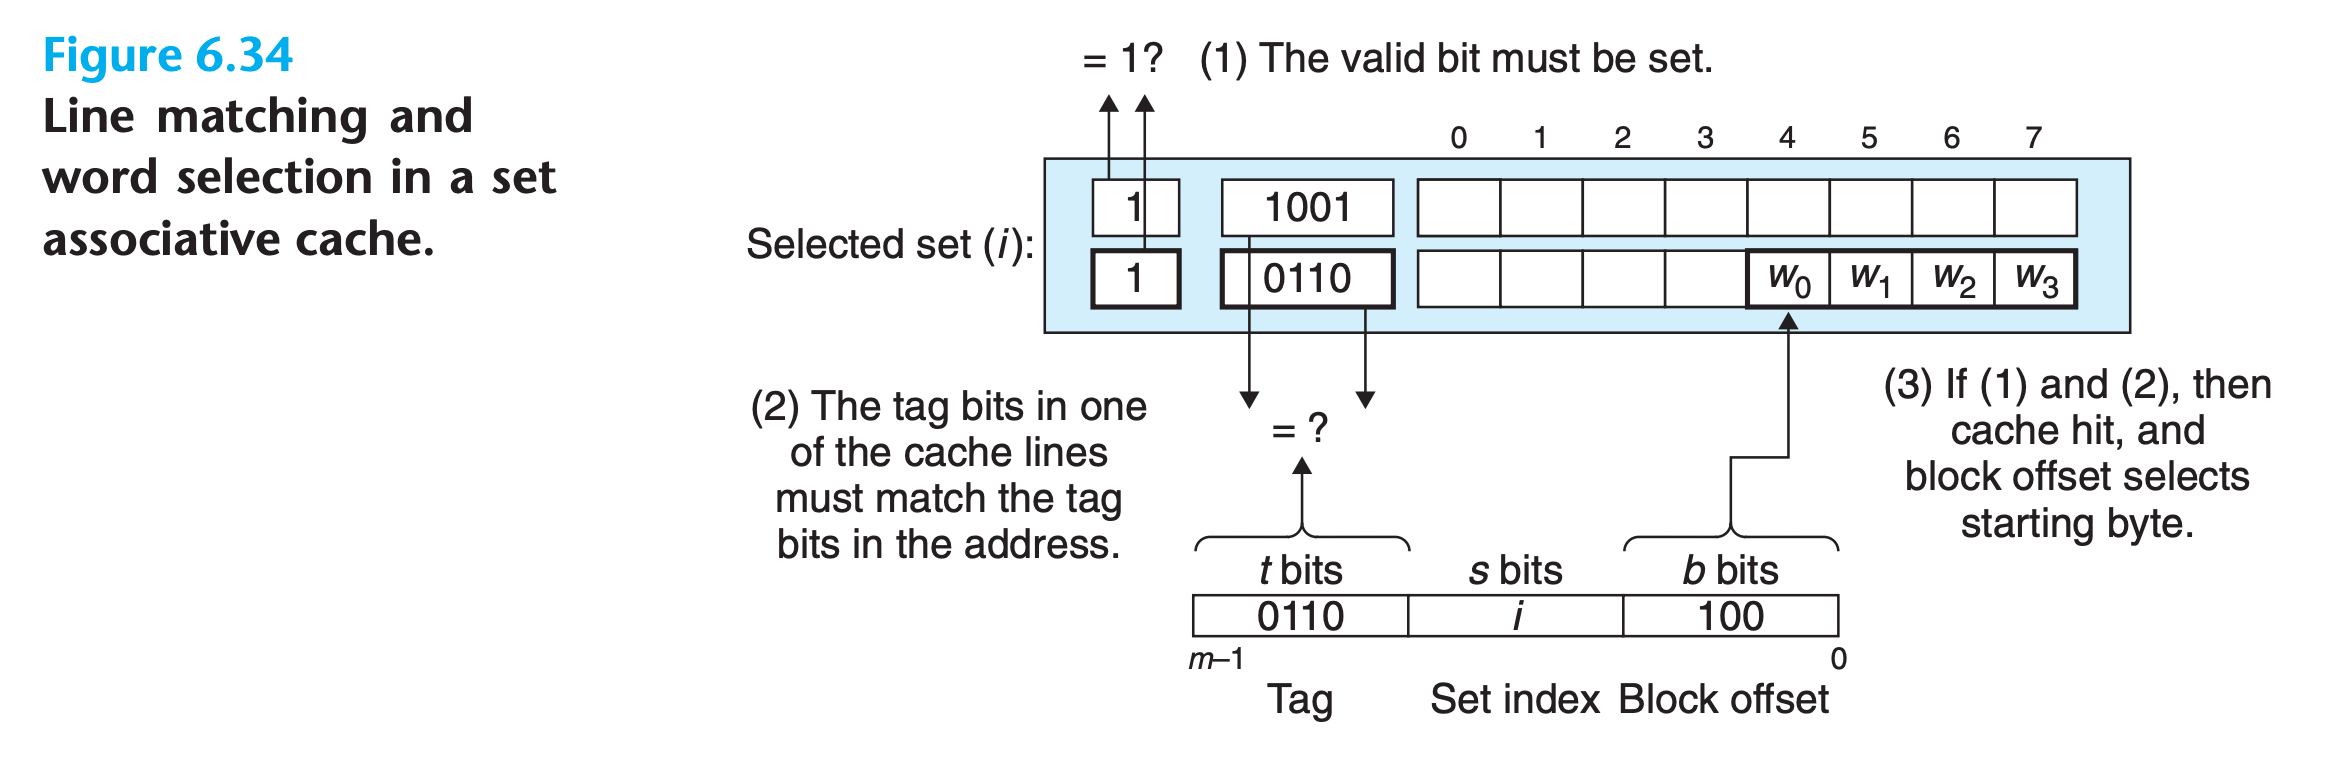 line matching in associative cache